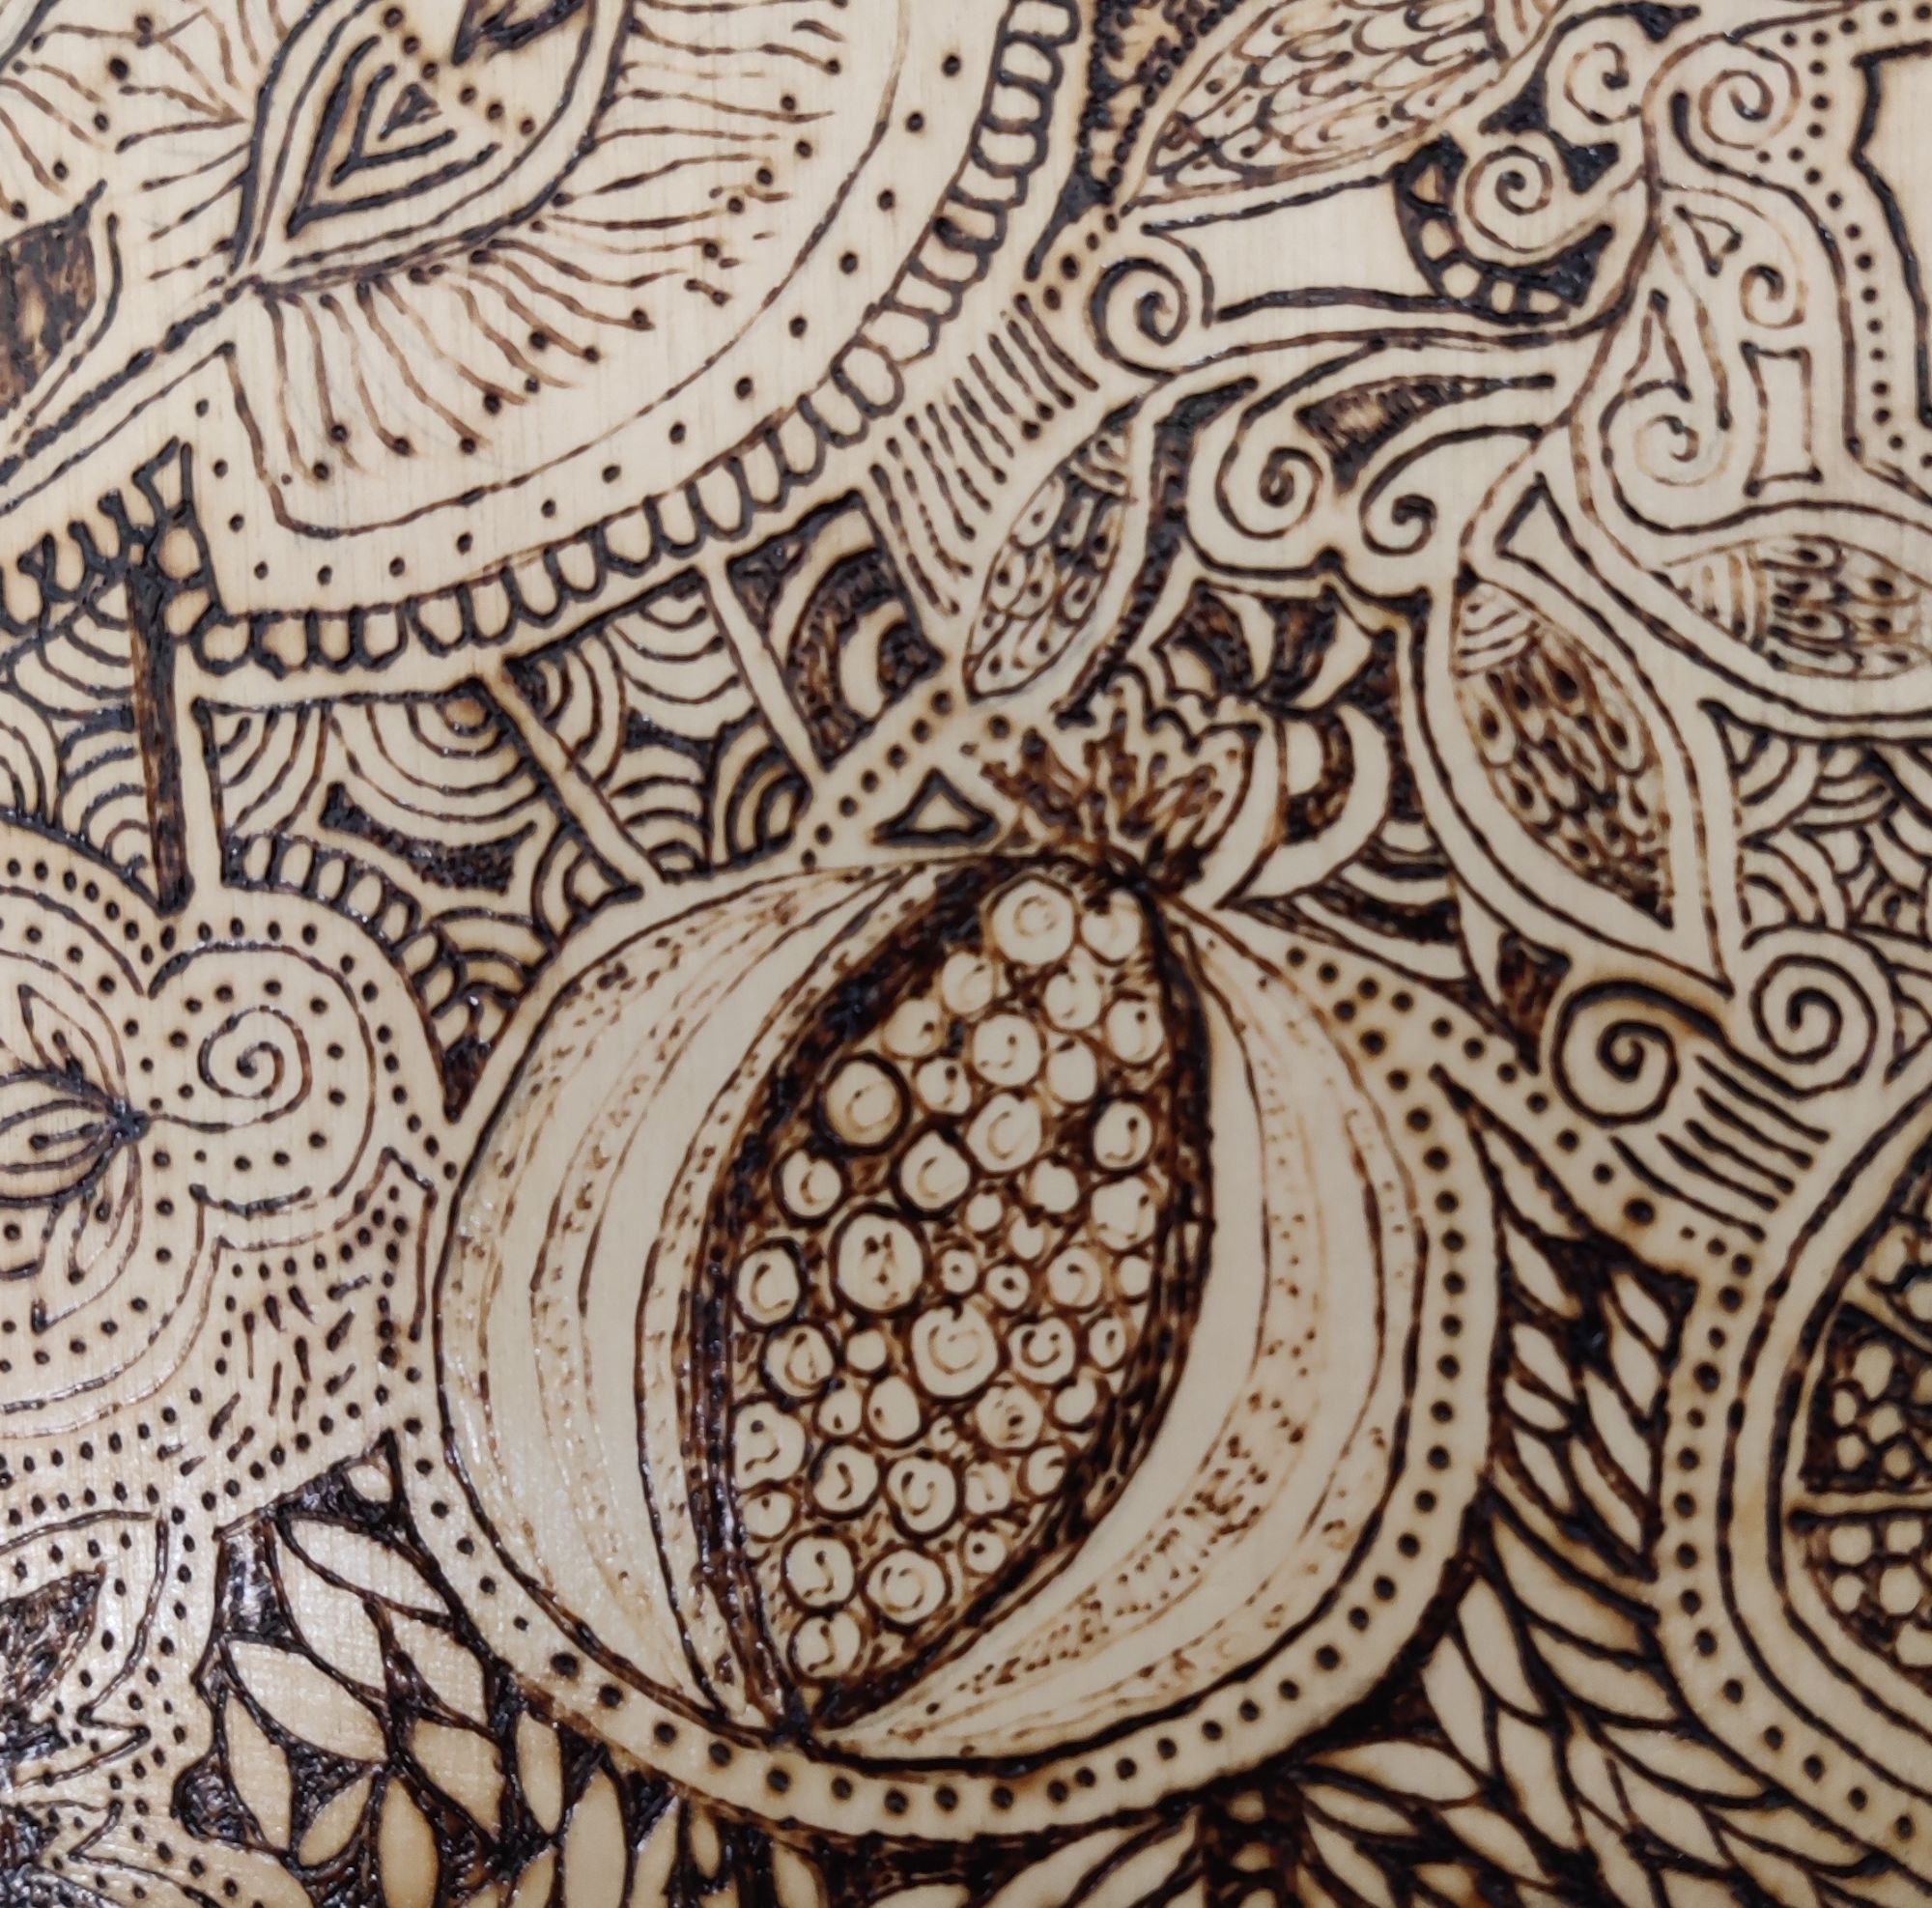 pyrography detail on wood panel